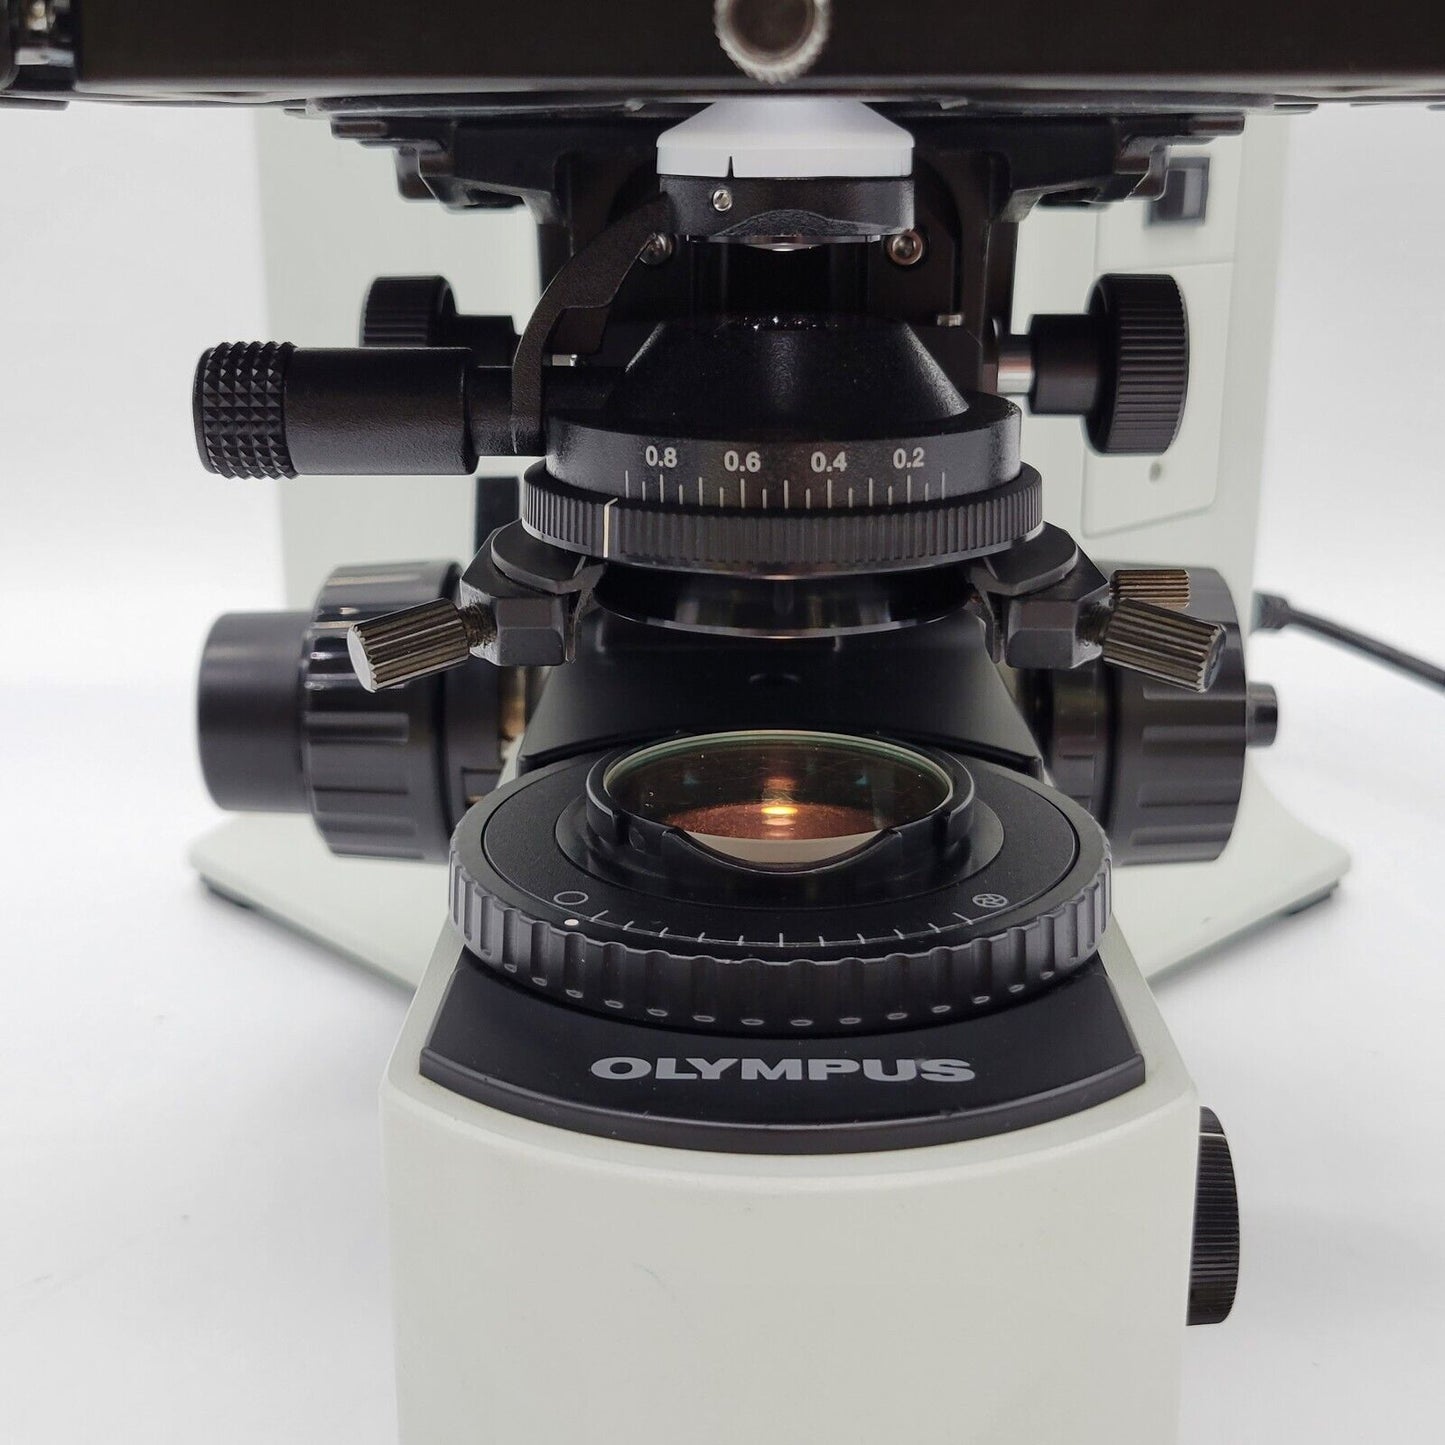 Olympus Microscope BX41 with Apos and Tilting Telescoping Head Pathology / Mohs - microscopemarketplace